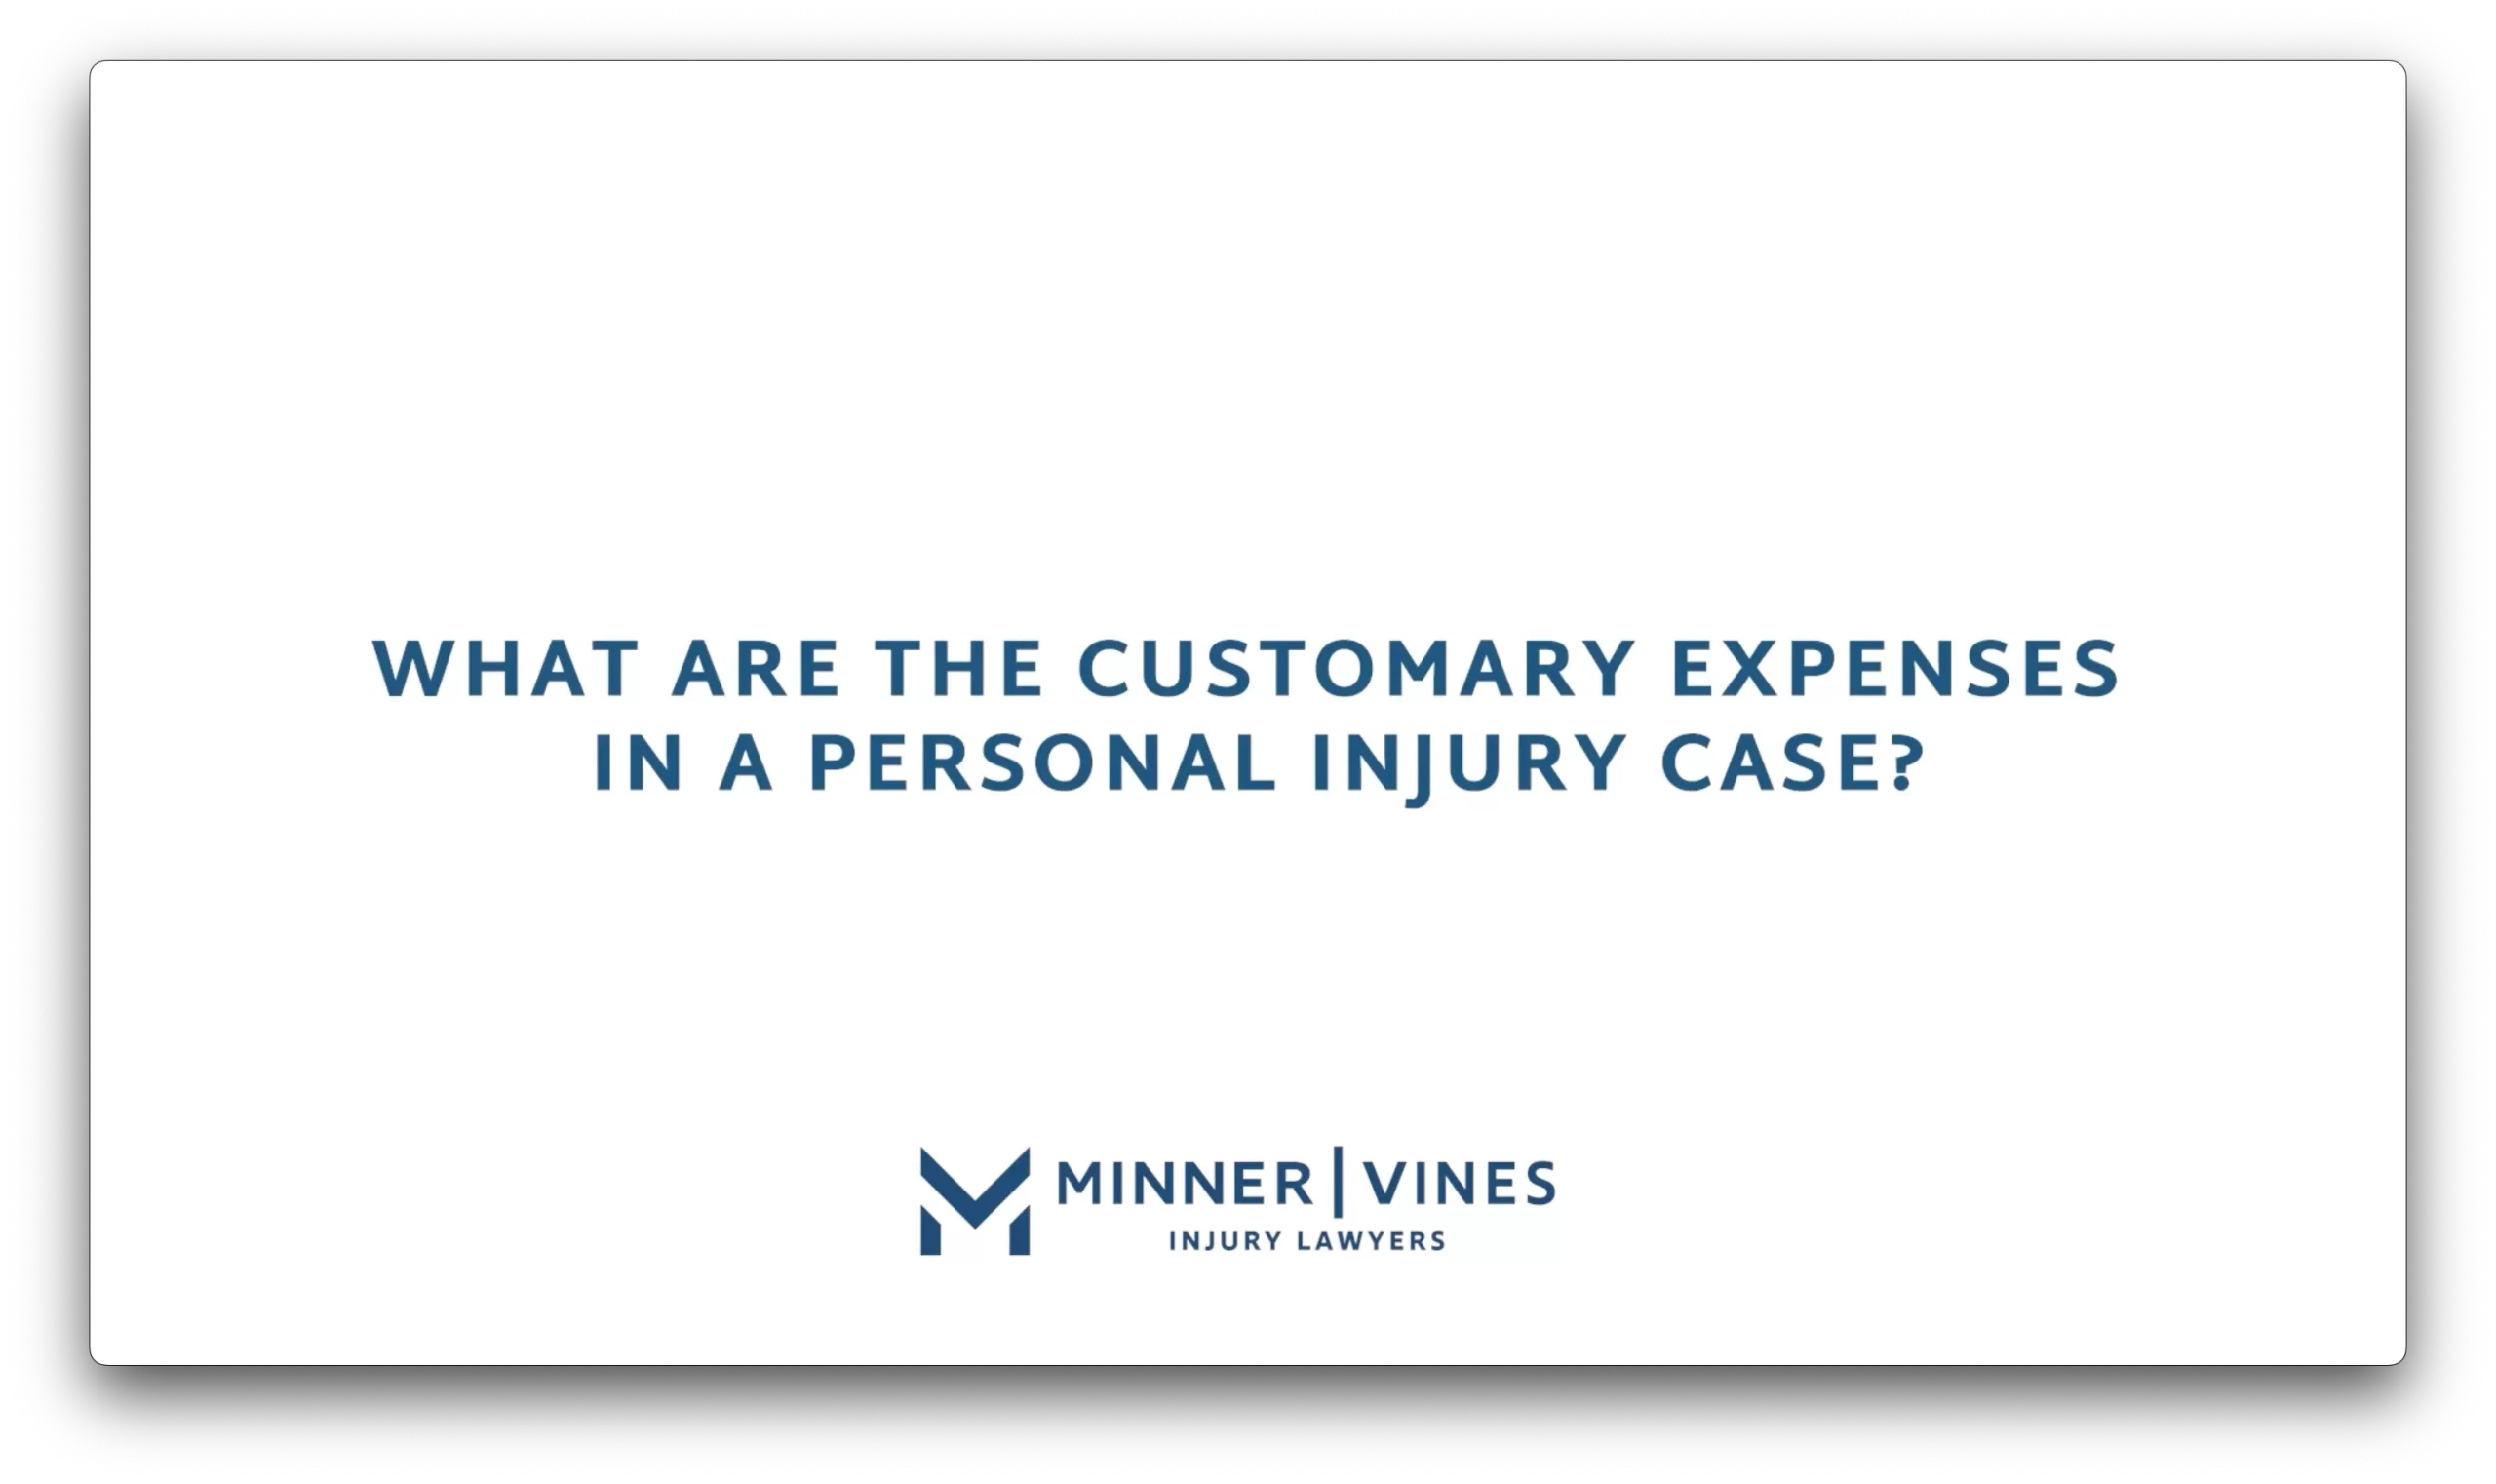 What are the customary expenses in a personal injury case?